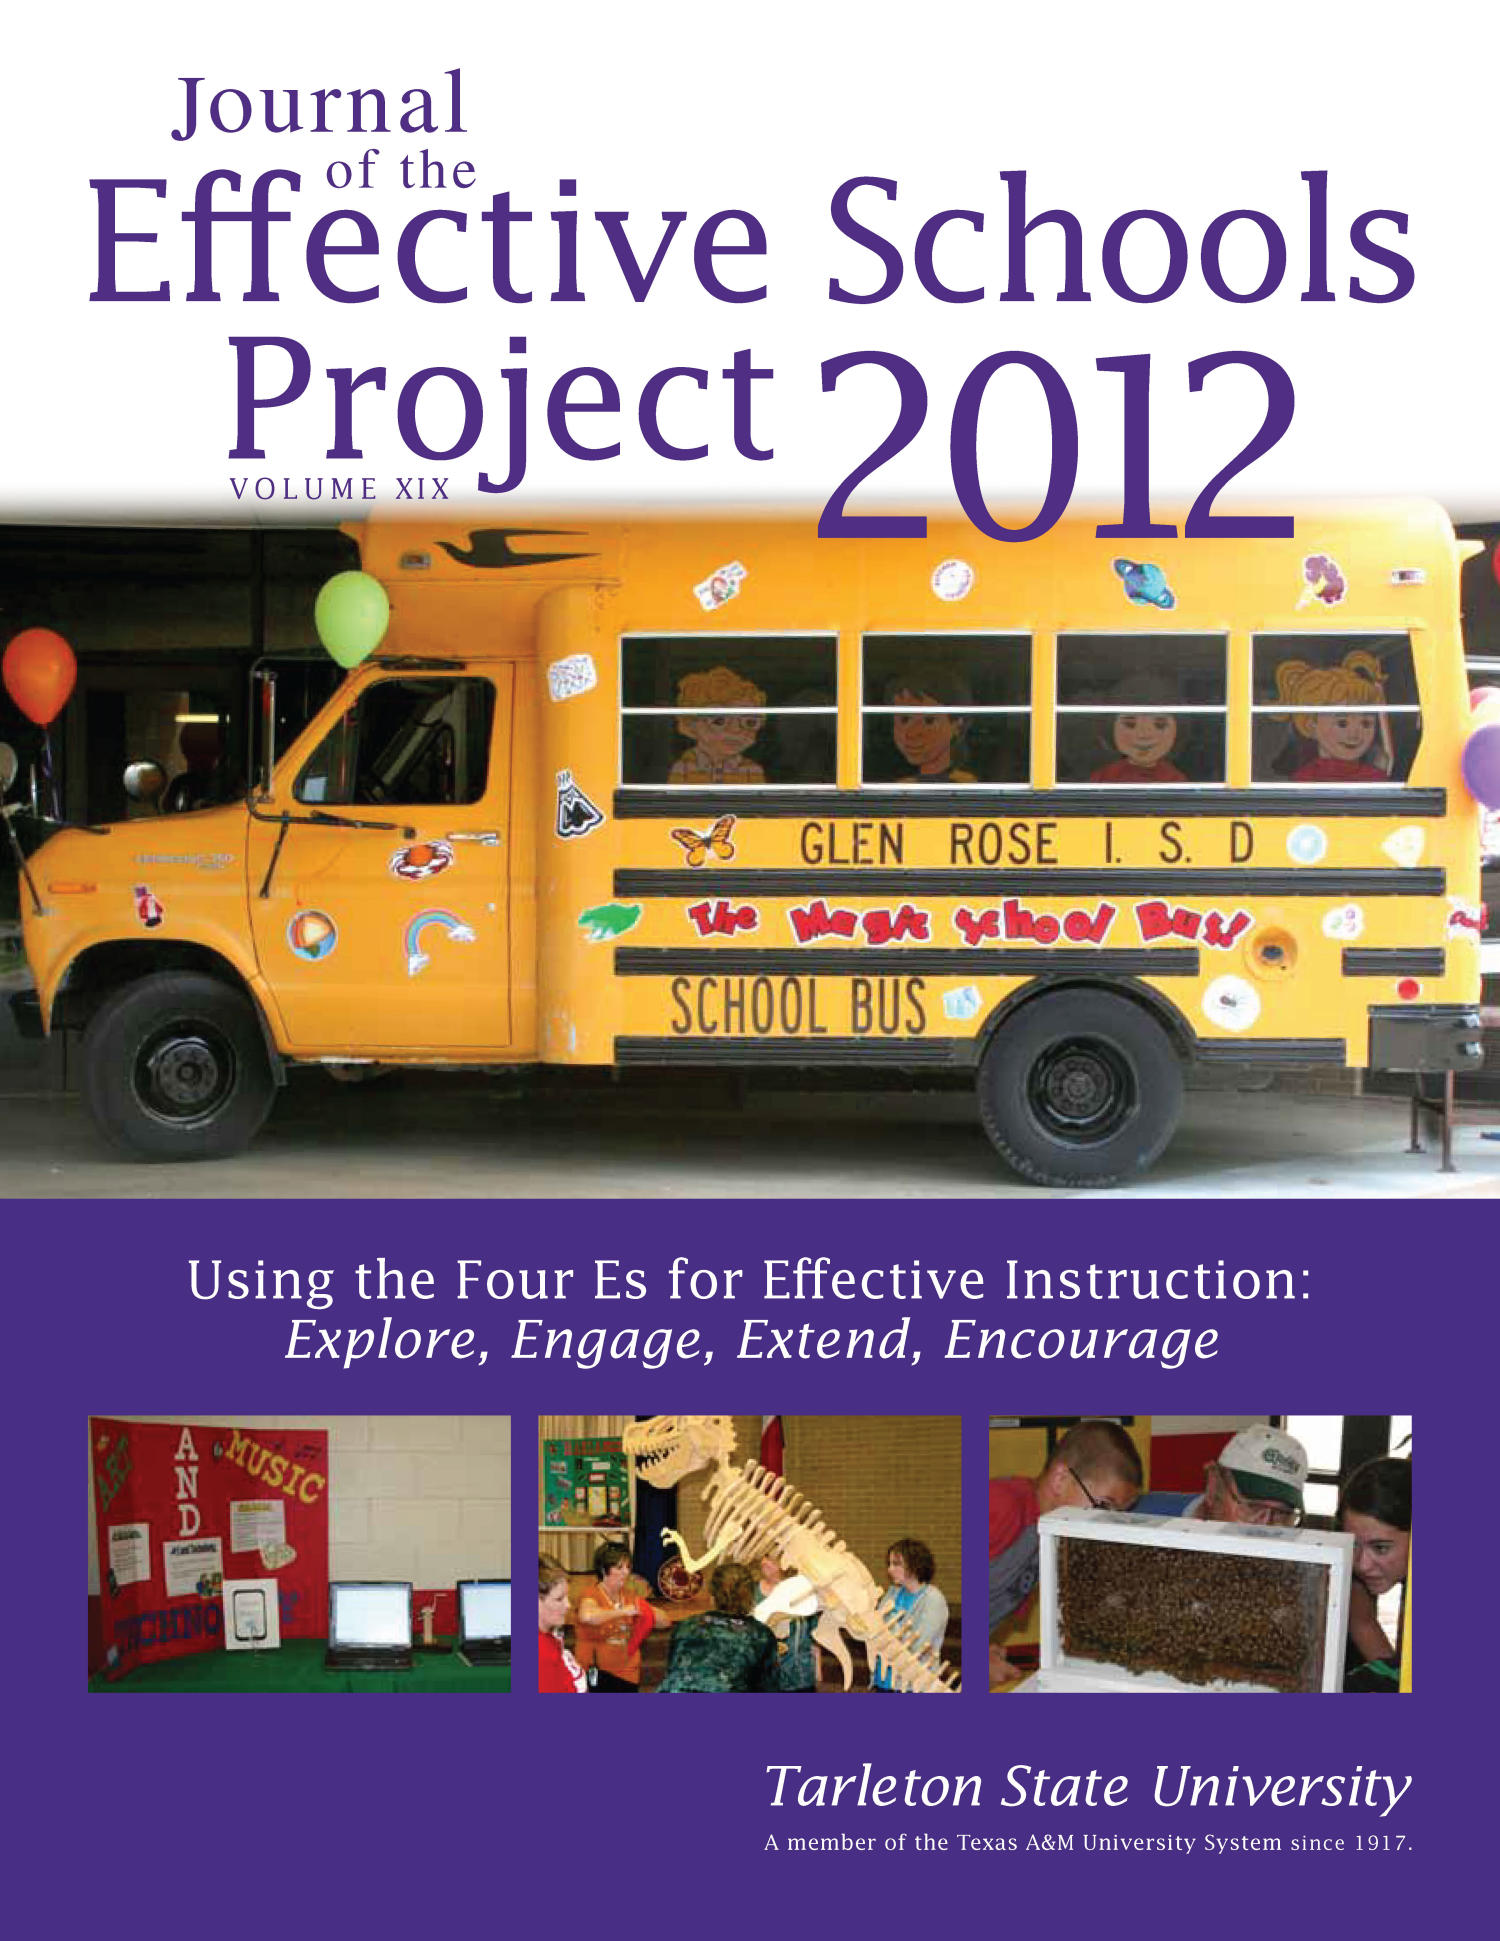 Journal of the Effective Schools Project, Volume 19, 2012
                                                
                                                    Front Cover
                                                